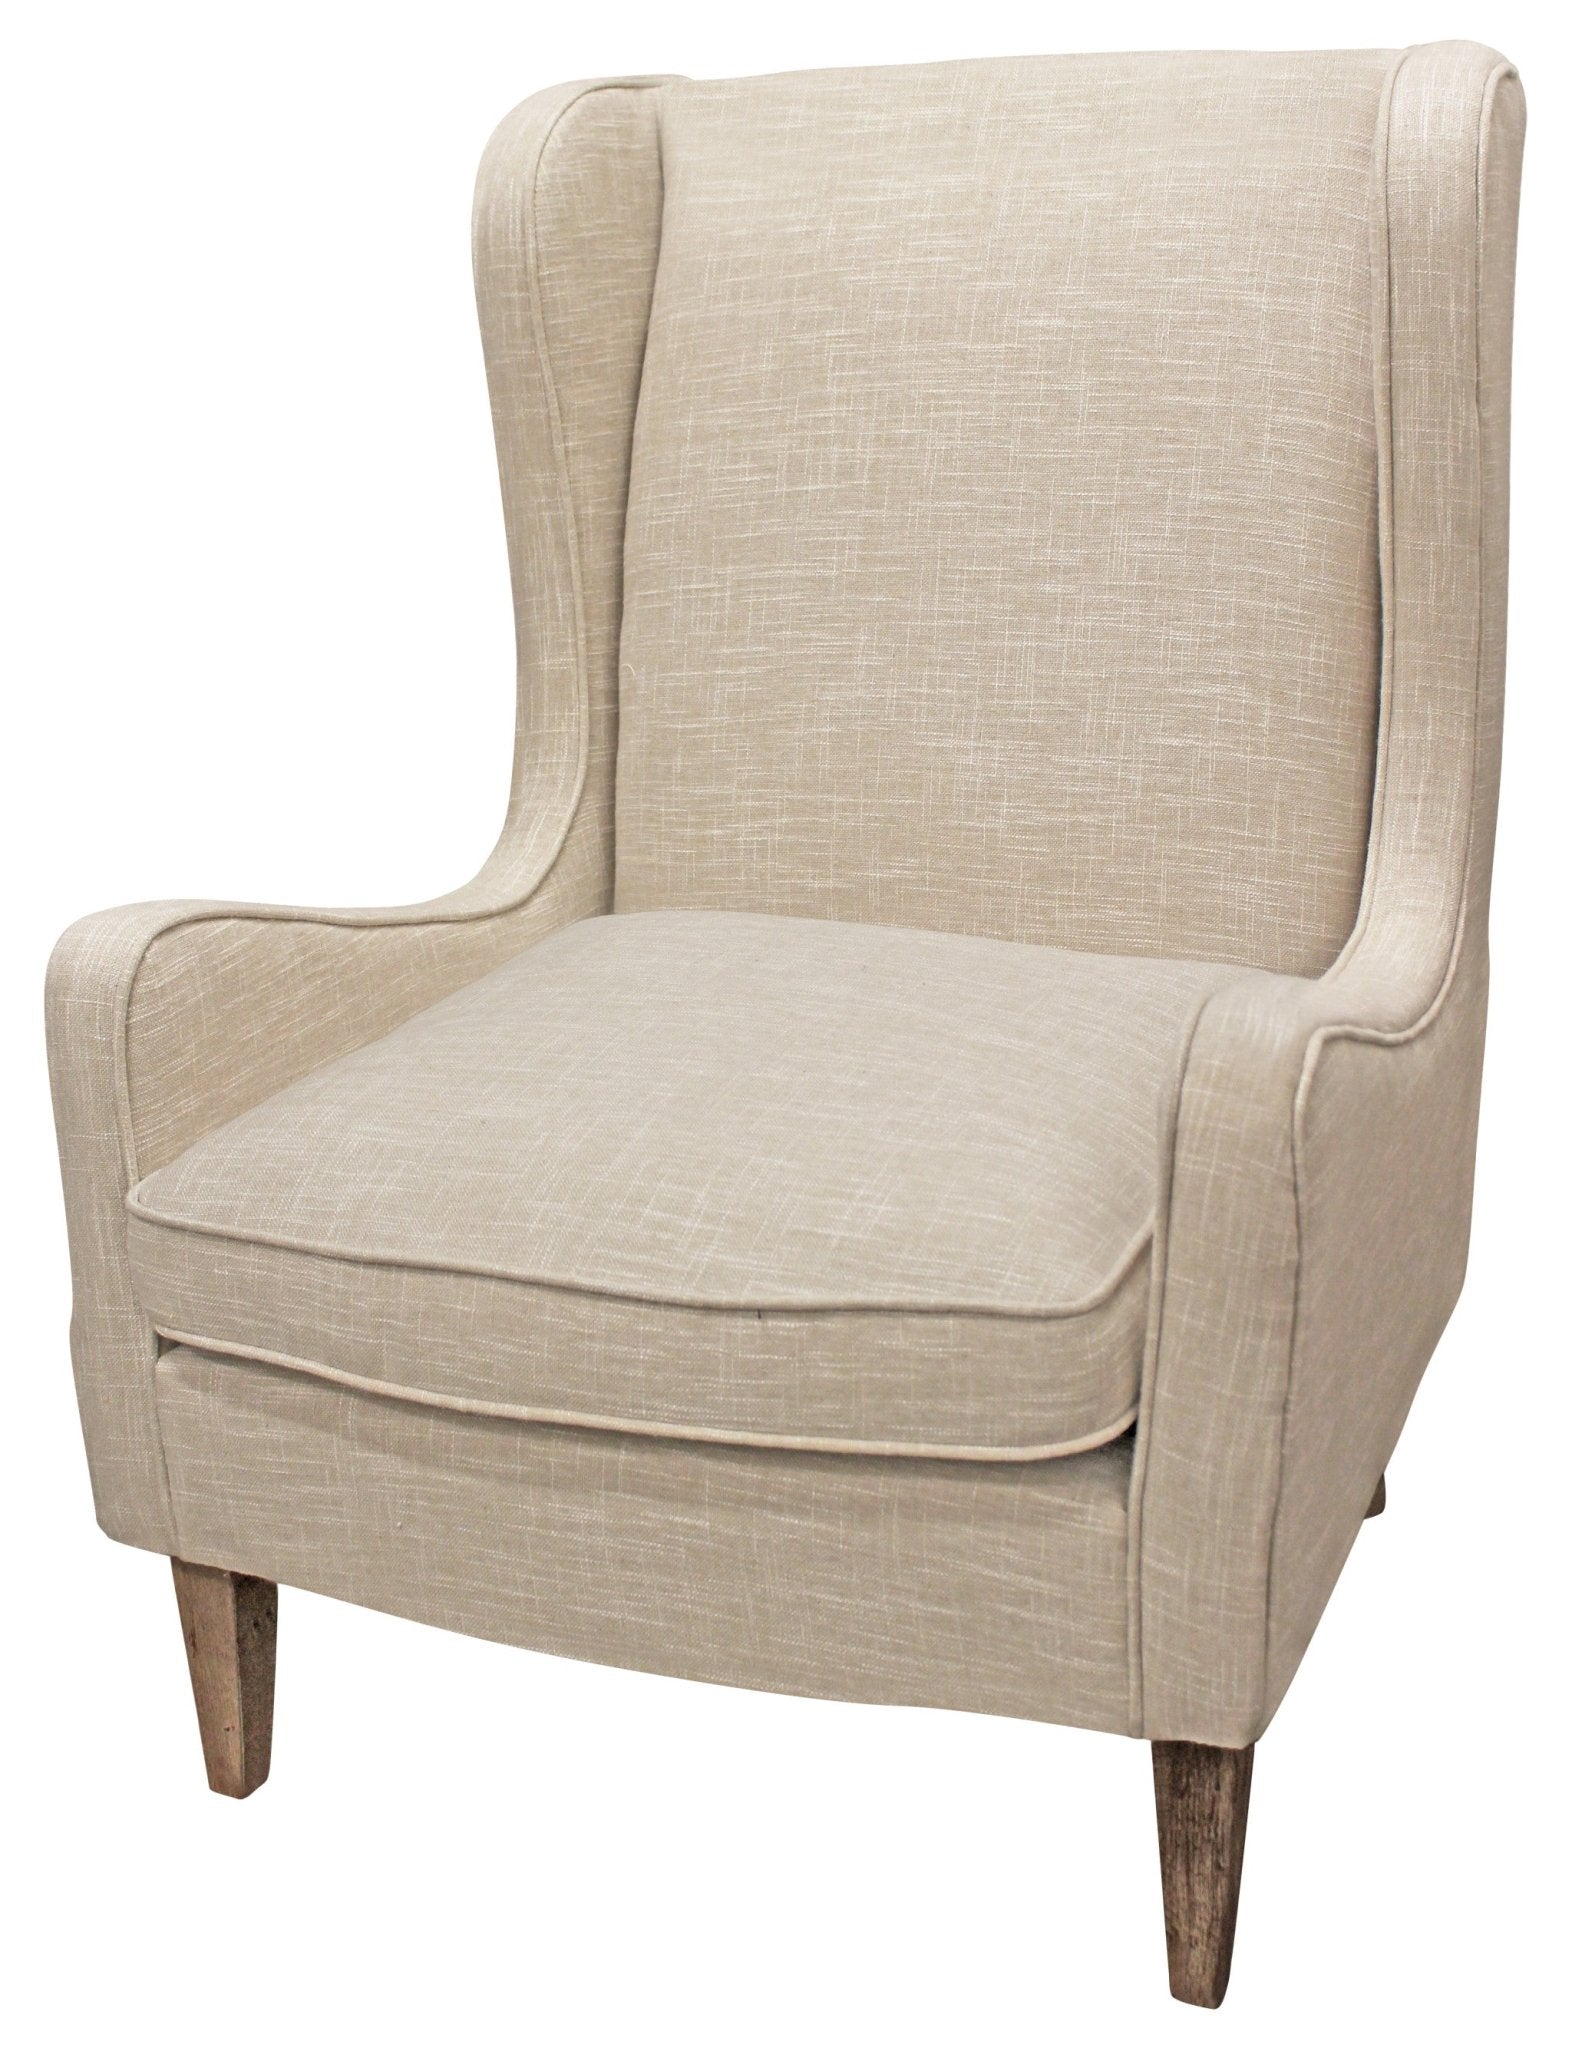 29" Natural Linen Solid Color Lounge Chair